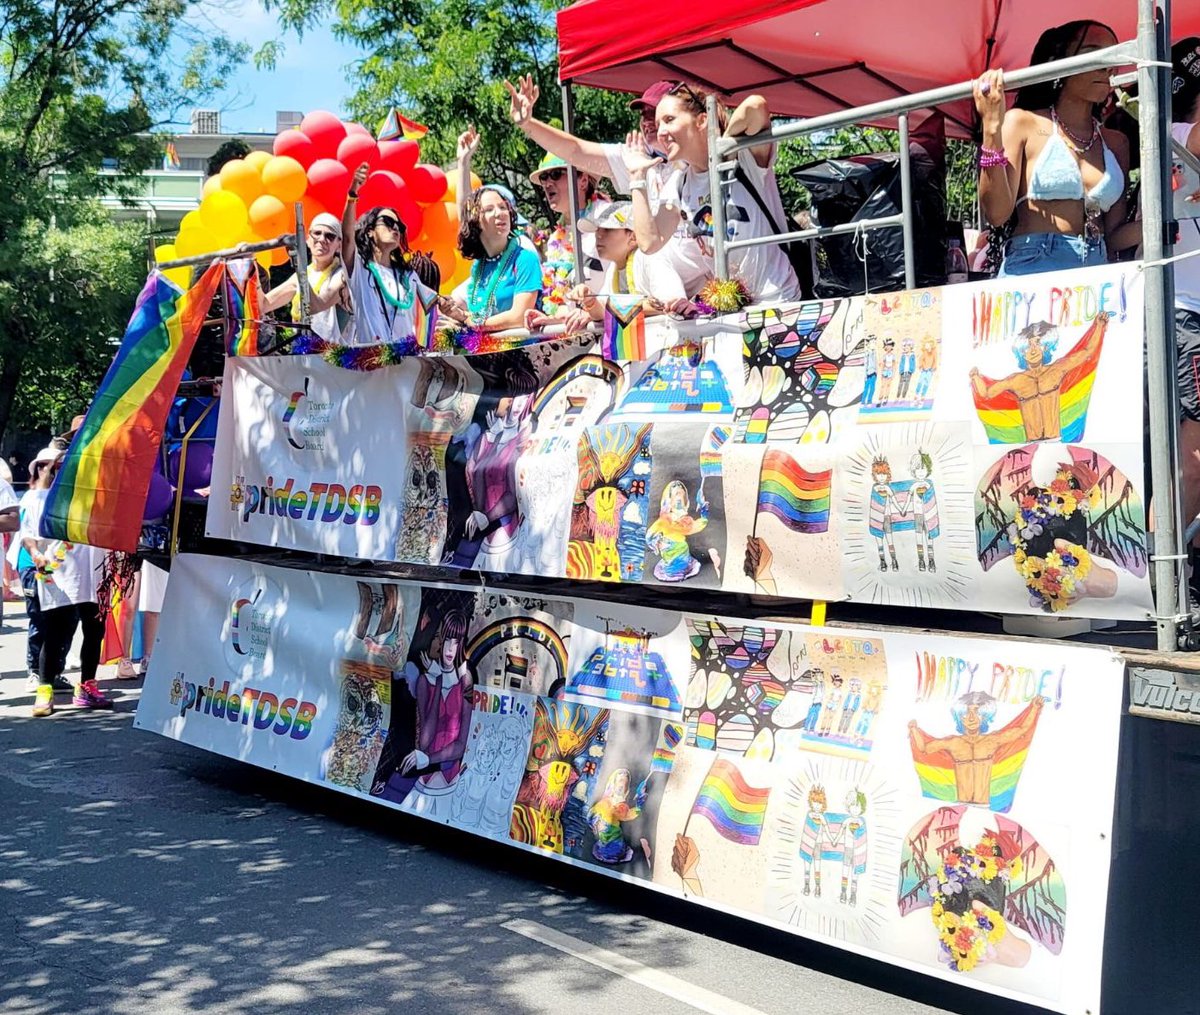 Great to see @tdsb student artwork featured on the #tdsbpride float today! Happy Pride!